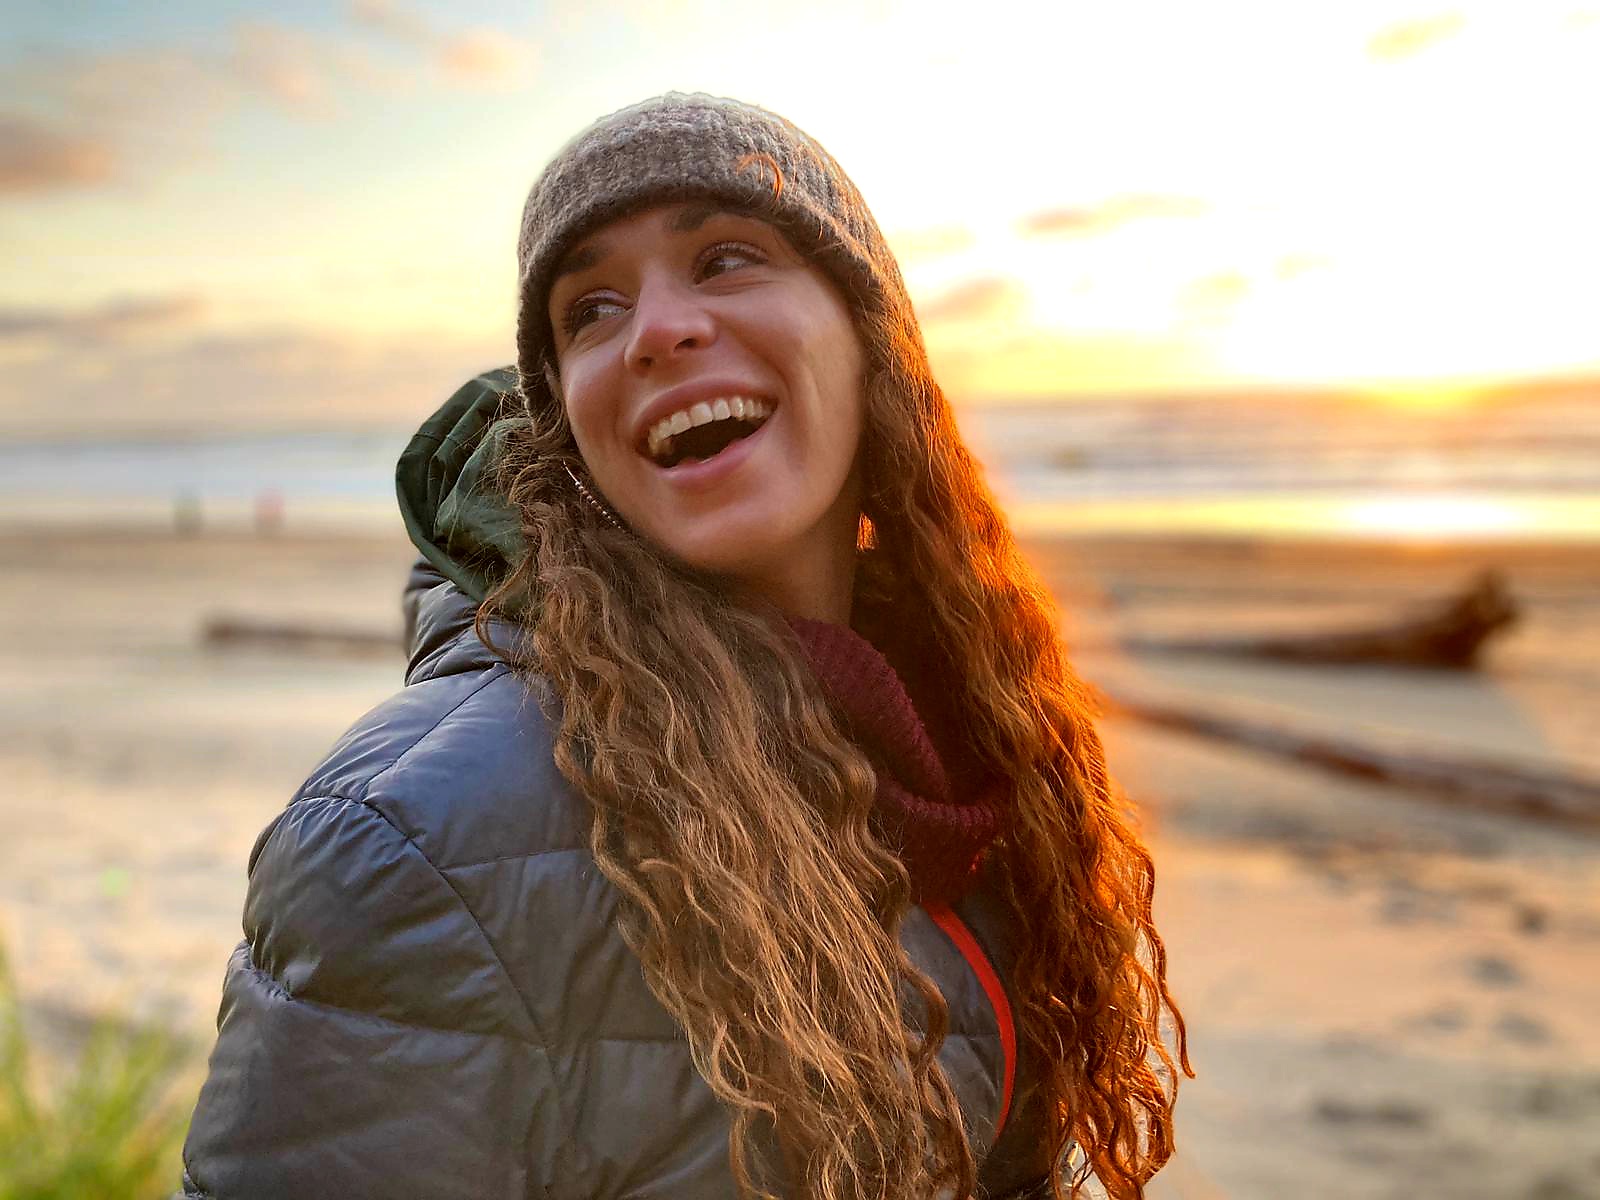 Zafiro Larsen, standing on a beach at sunset and grinning widely